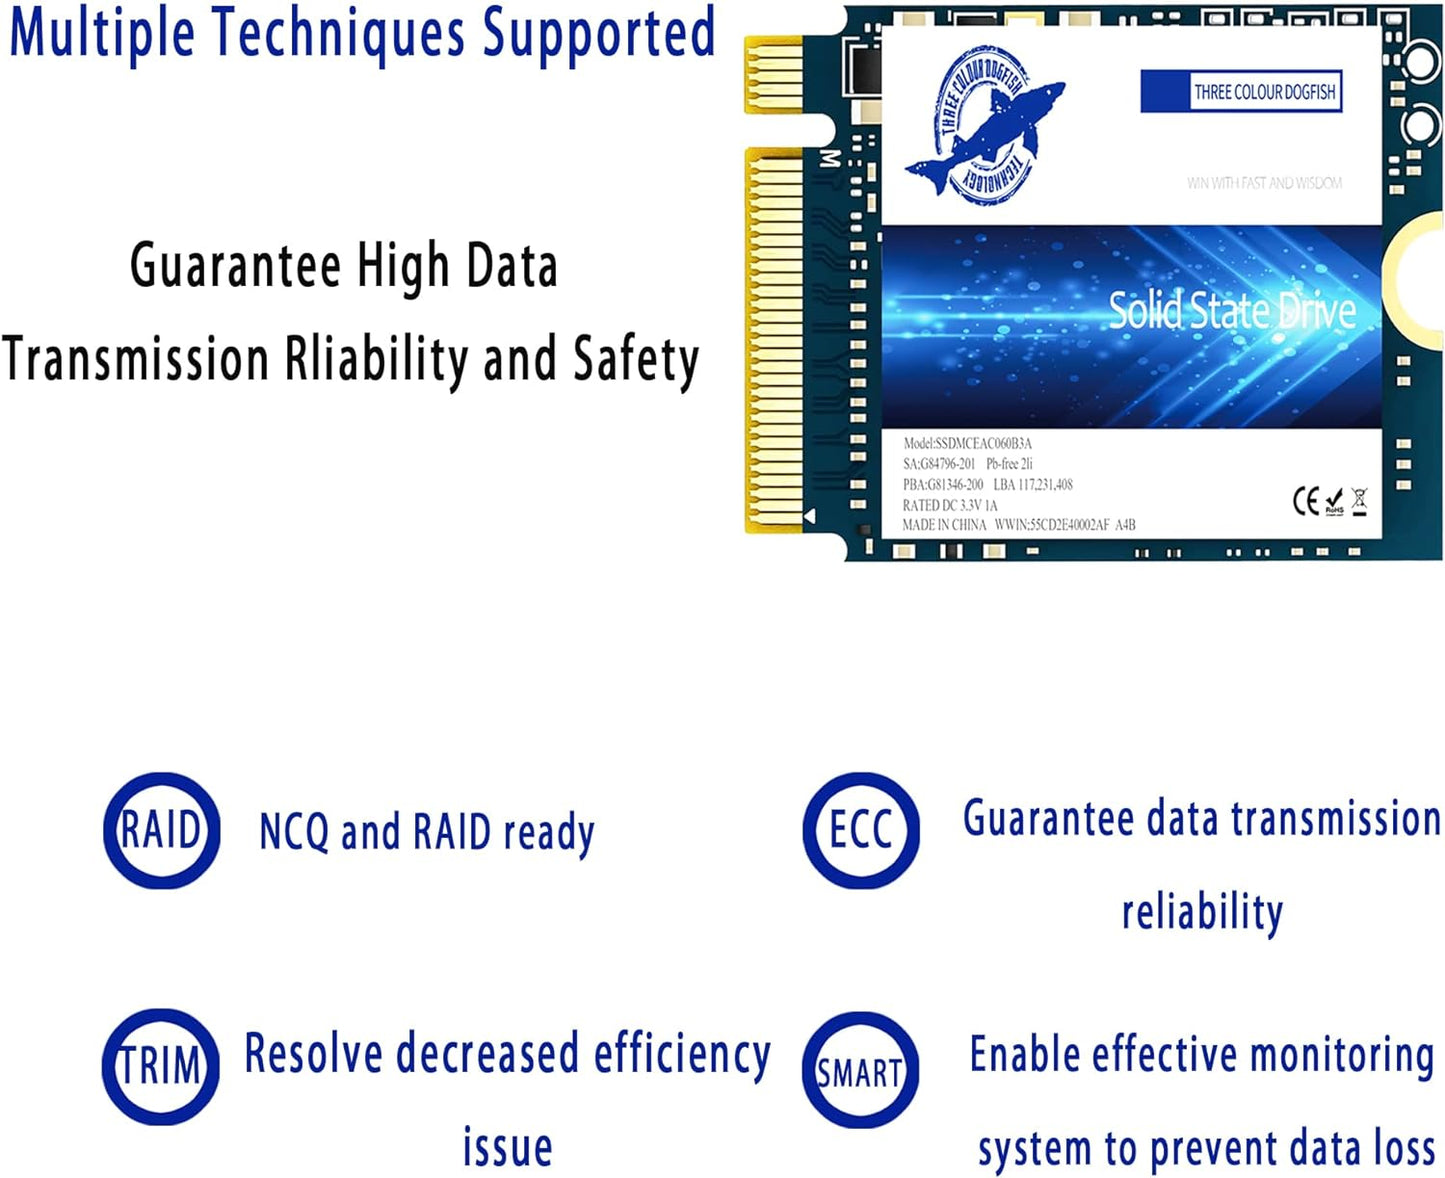 DOGFISH M.2 2230 SSD PCIe3.0 Great for Steam Deck and Microsoft Surface